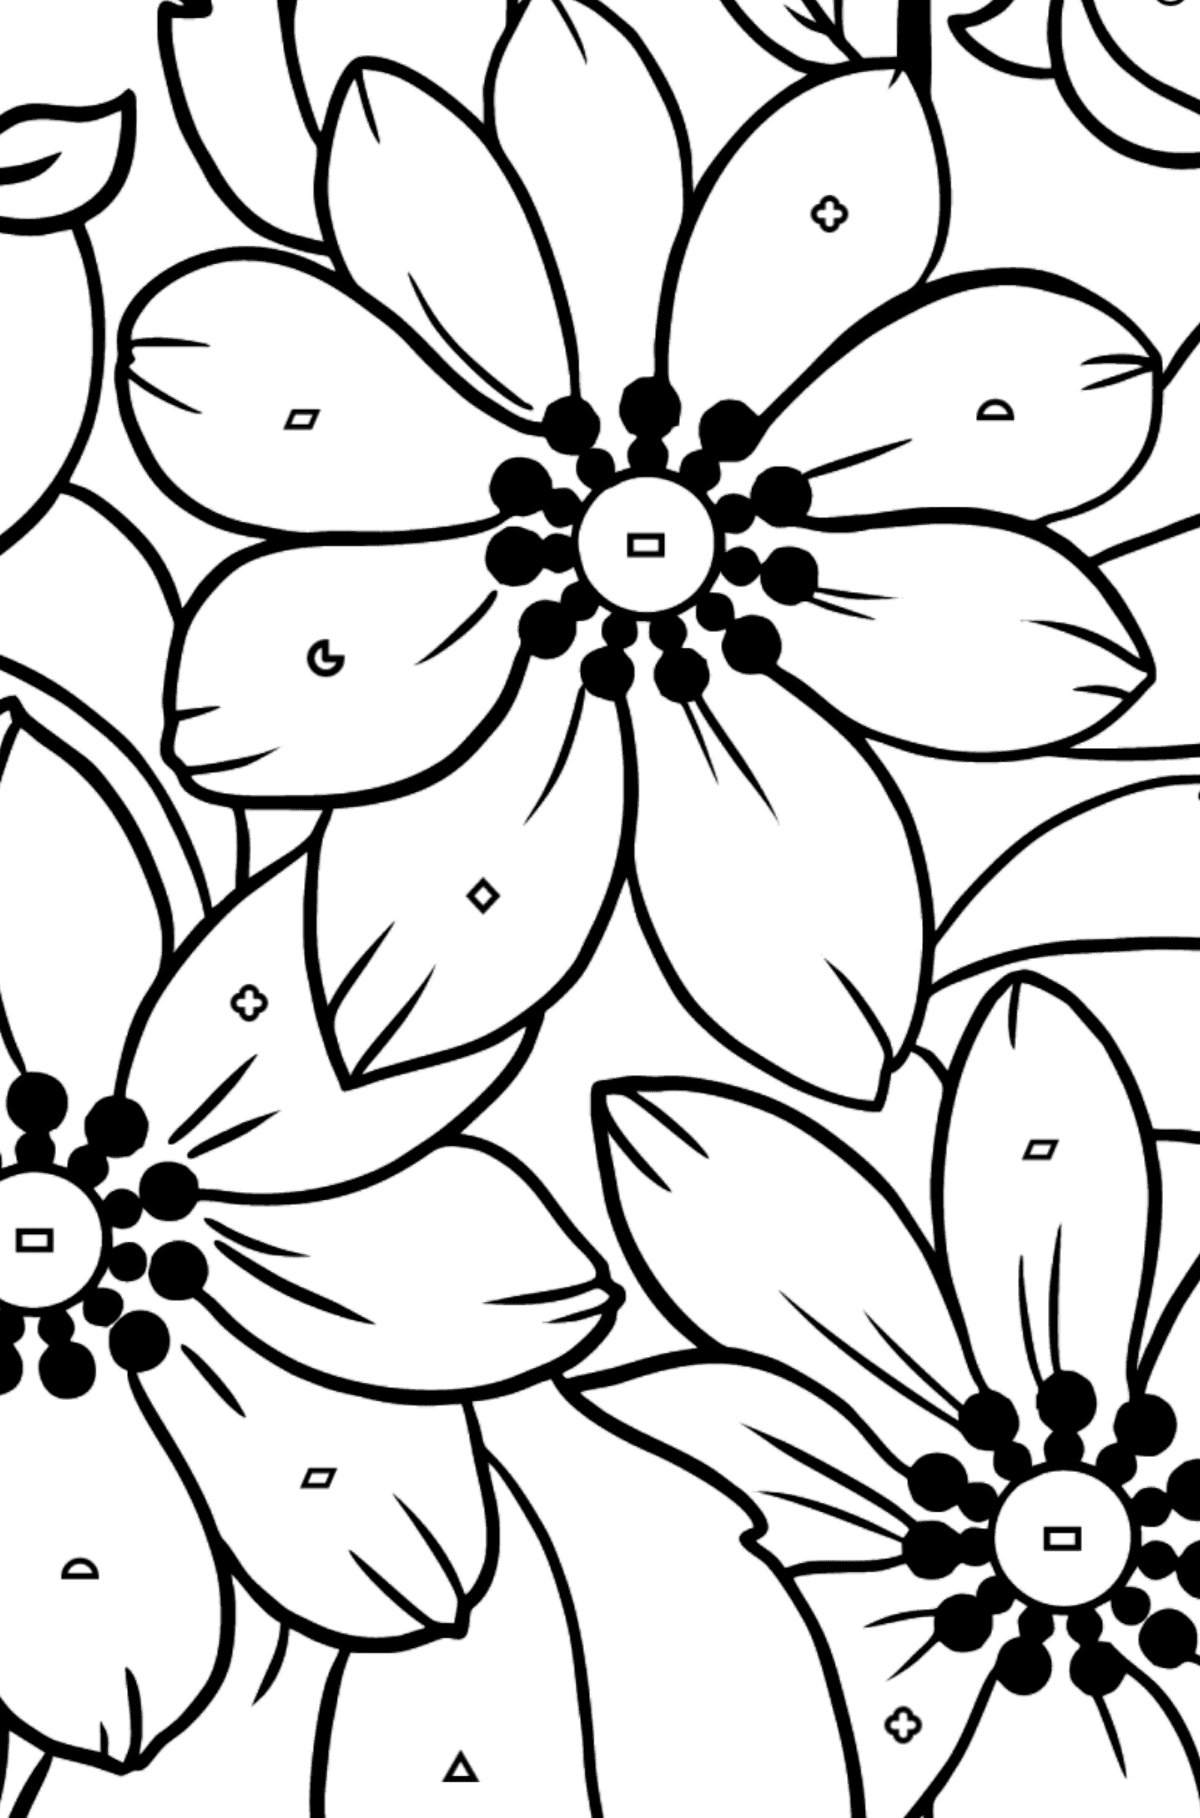 Flower Coloring Page - An Orange and Yellow Anemone - Coloring by Geometric Shapes for Kids